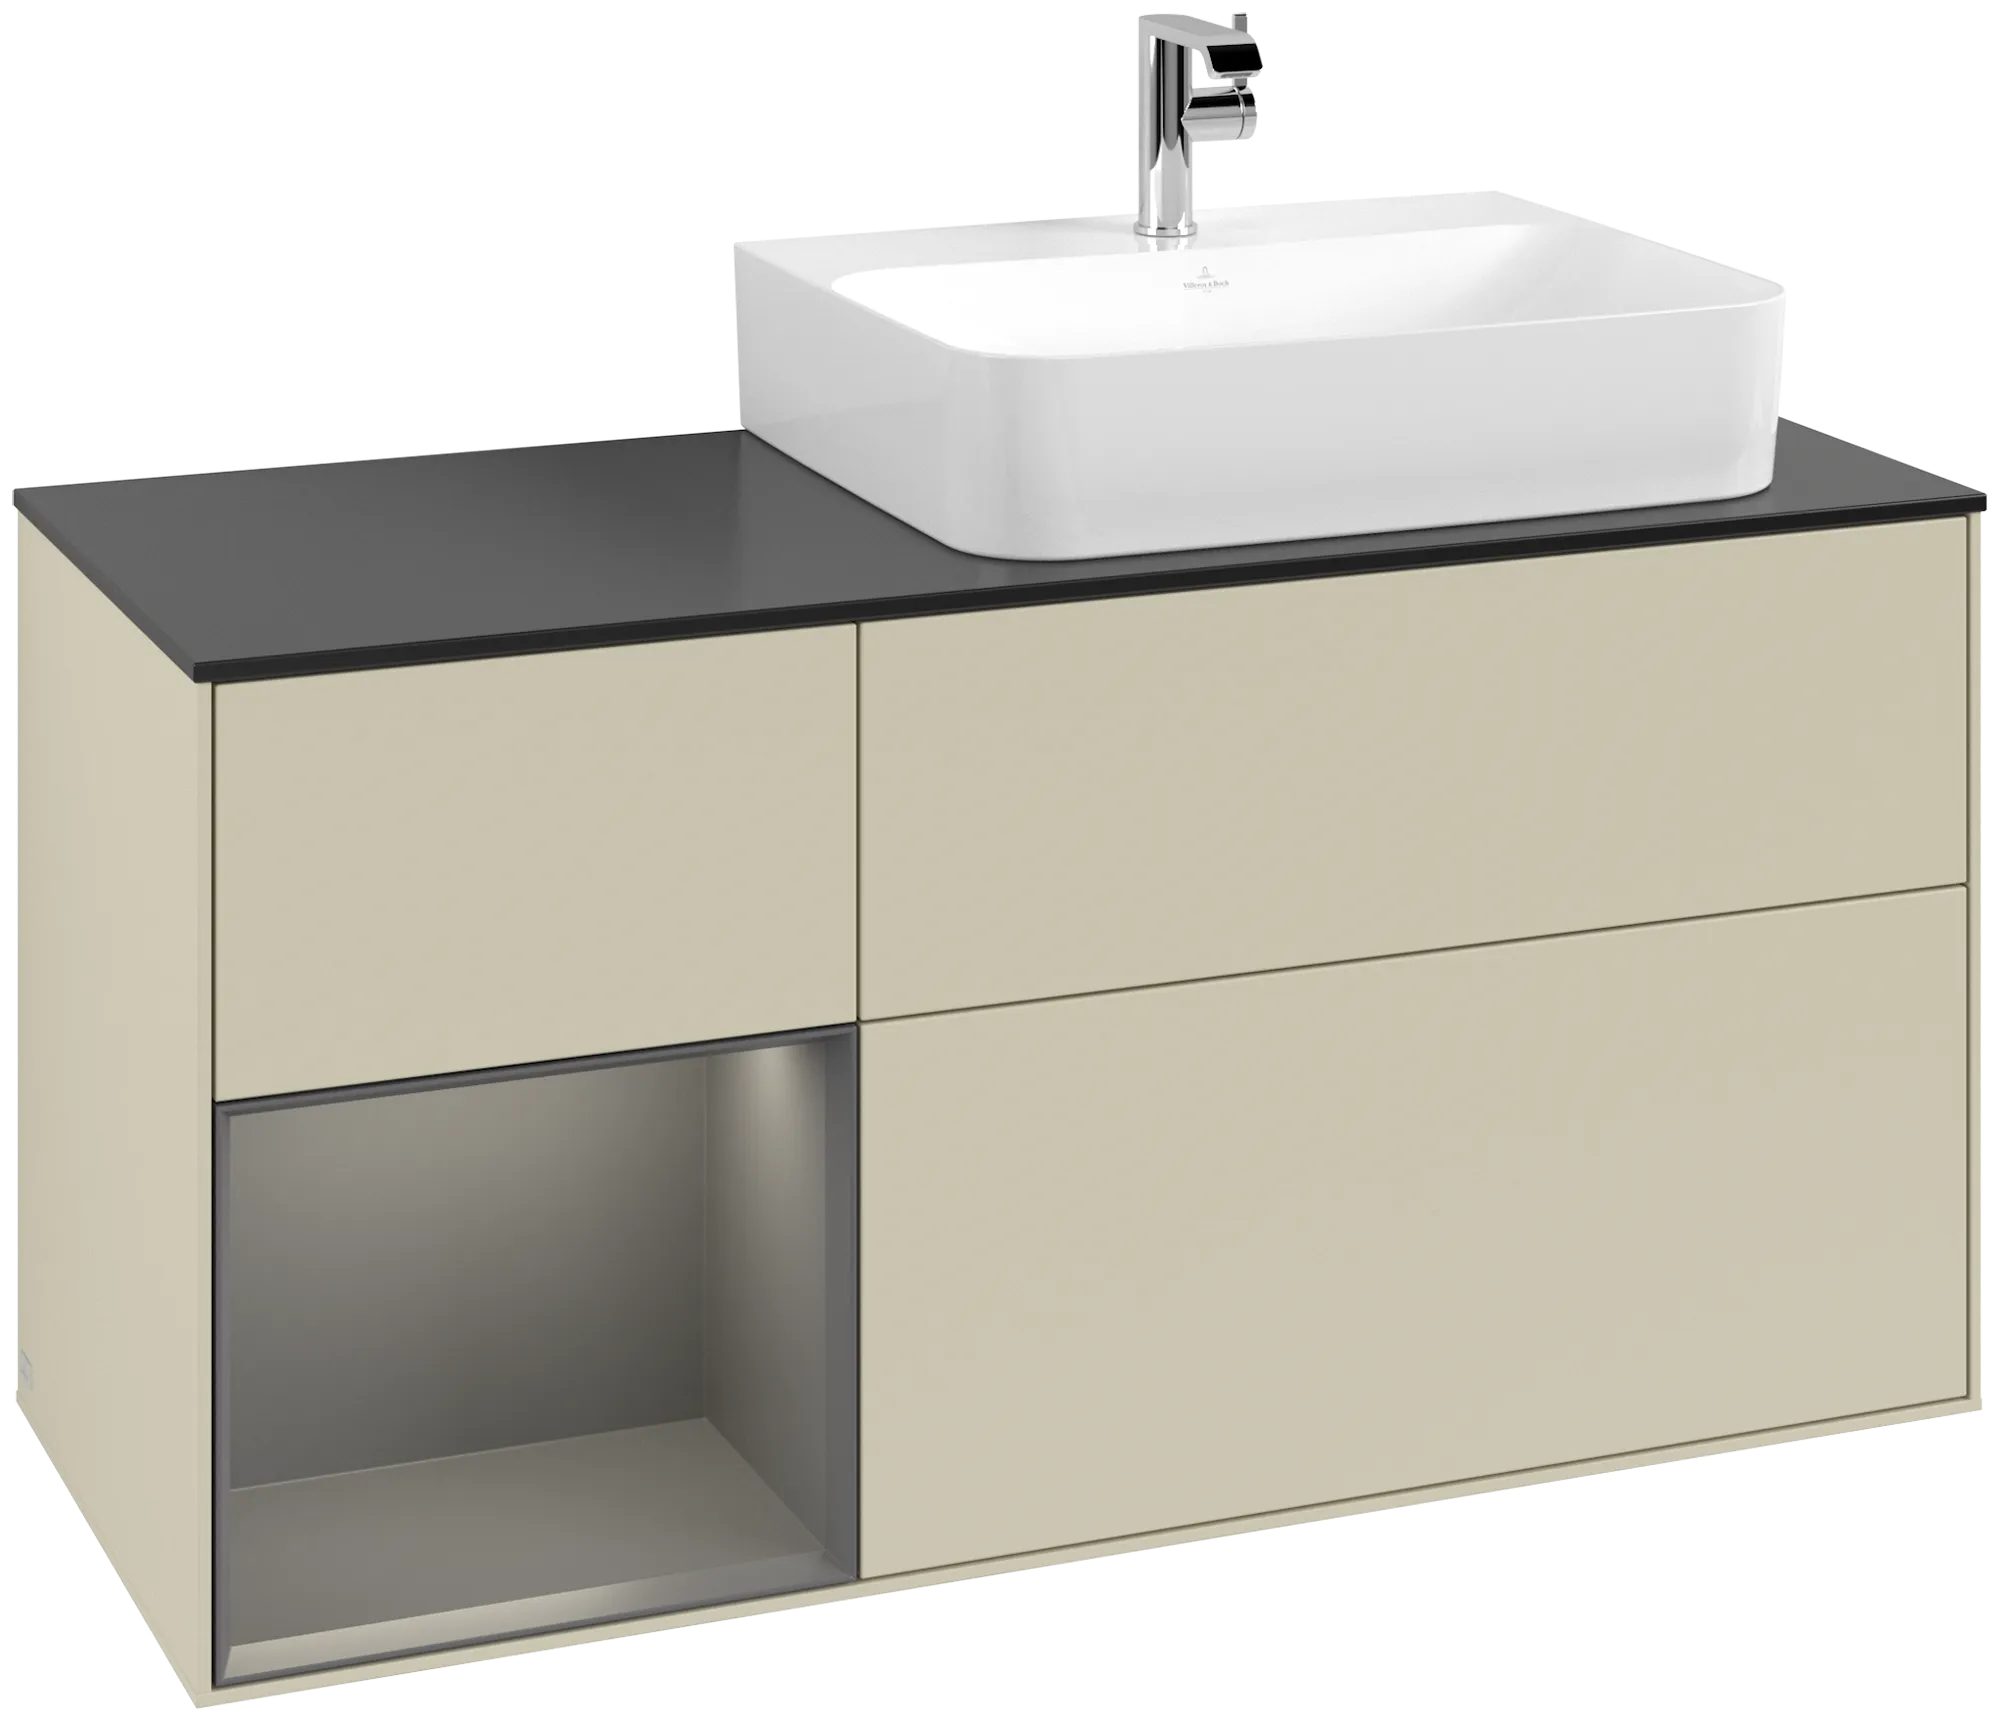 Picture of VILLEROY BOCH Finion Vanity unit, with lighting, 3 pull-out compartments, 1200 x 603 x 501 mm, Silk Grey Matt Lacquer / Anthracite Matt Lacquer / Glass Black Matt #G142GKHJ